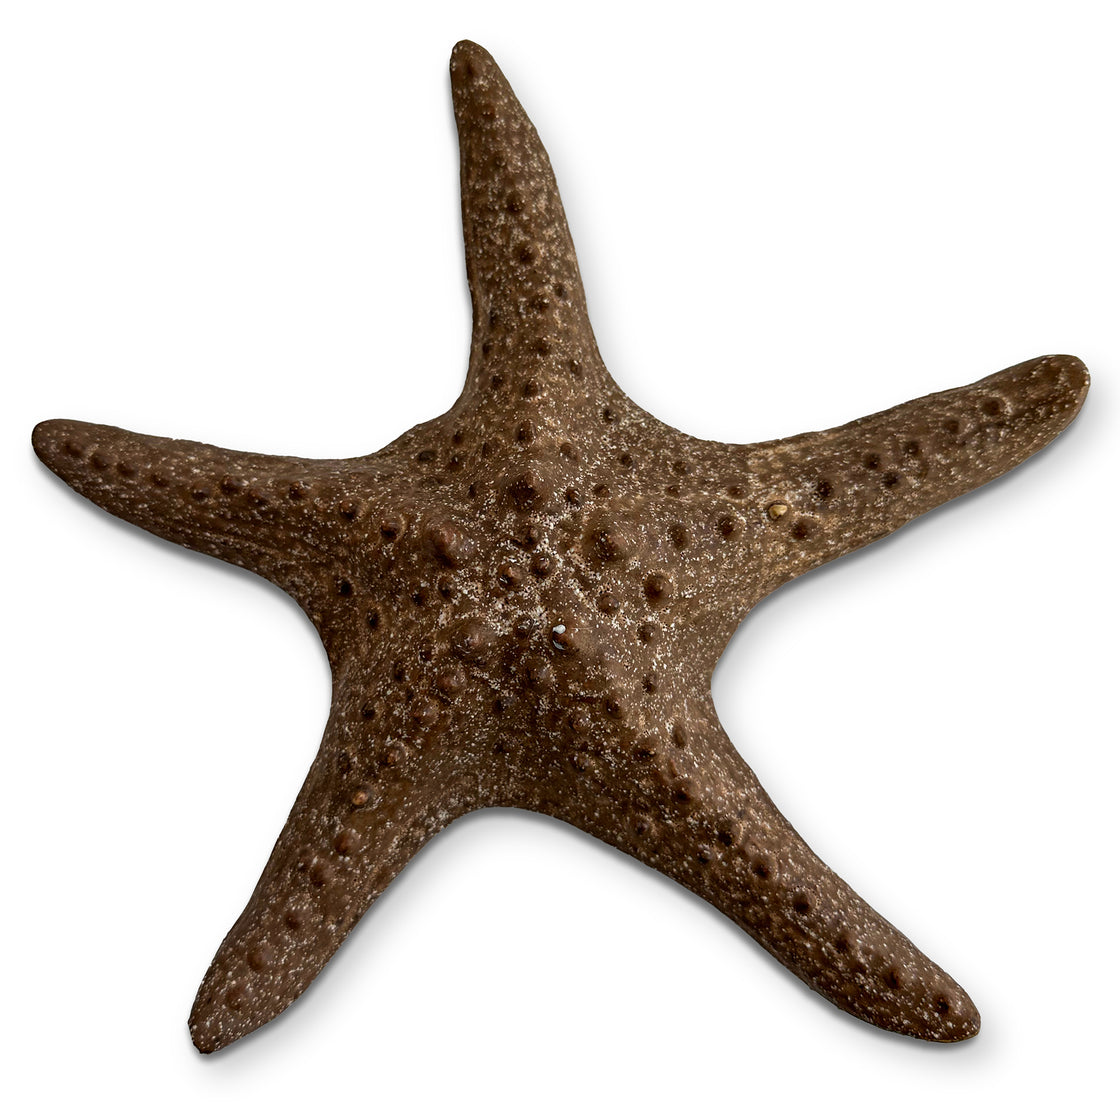 A lifelike rengora ceramic starfish, meticulously crafted with a natural brown hue, capturing the essence of this marine creature's appearance. The realistic details and earthy coloration make it a striking addition to ocean-themed decor or a collector's display